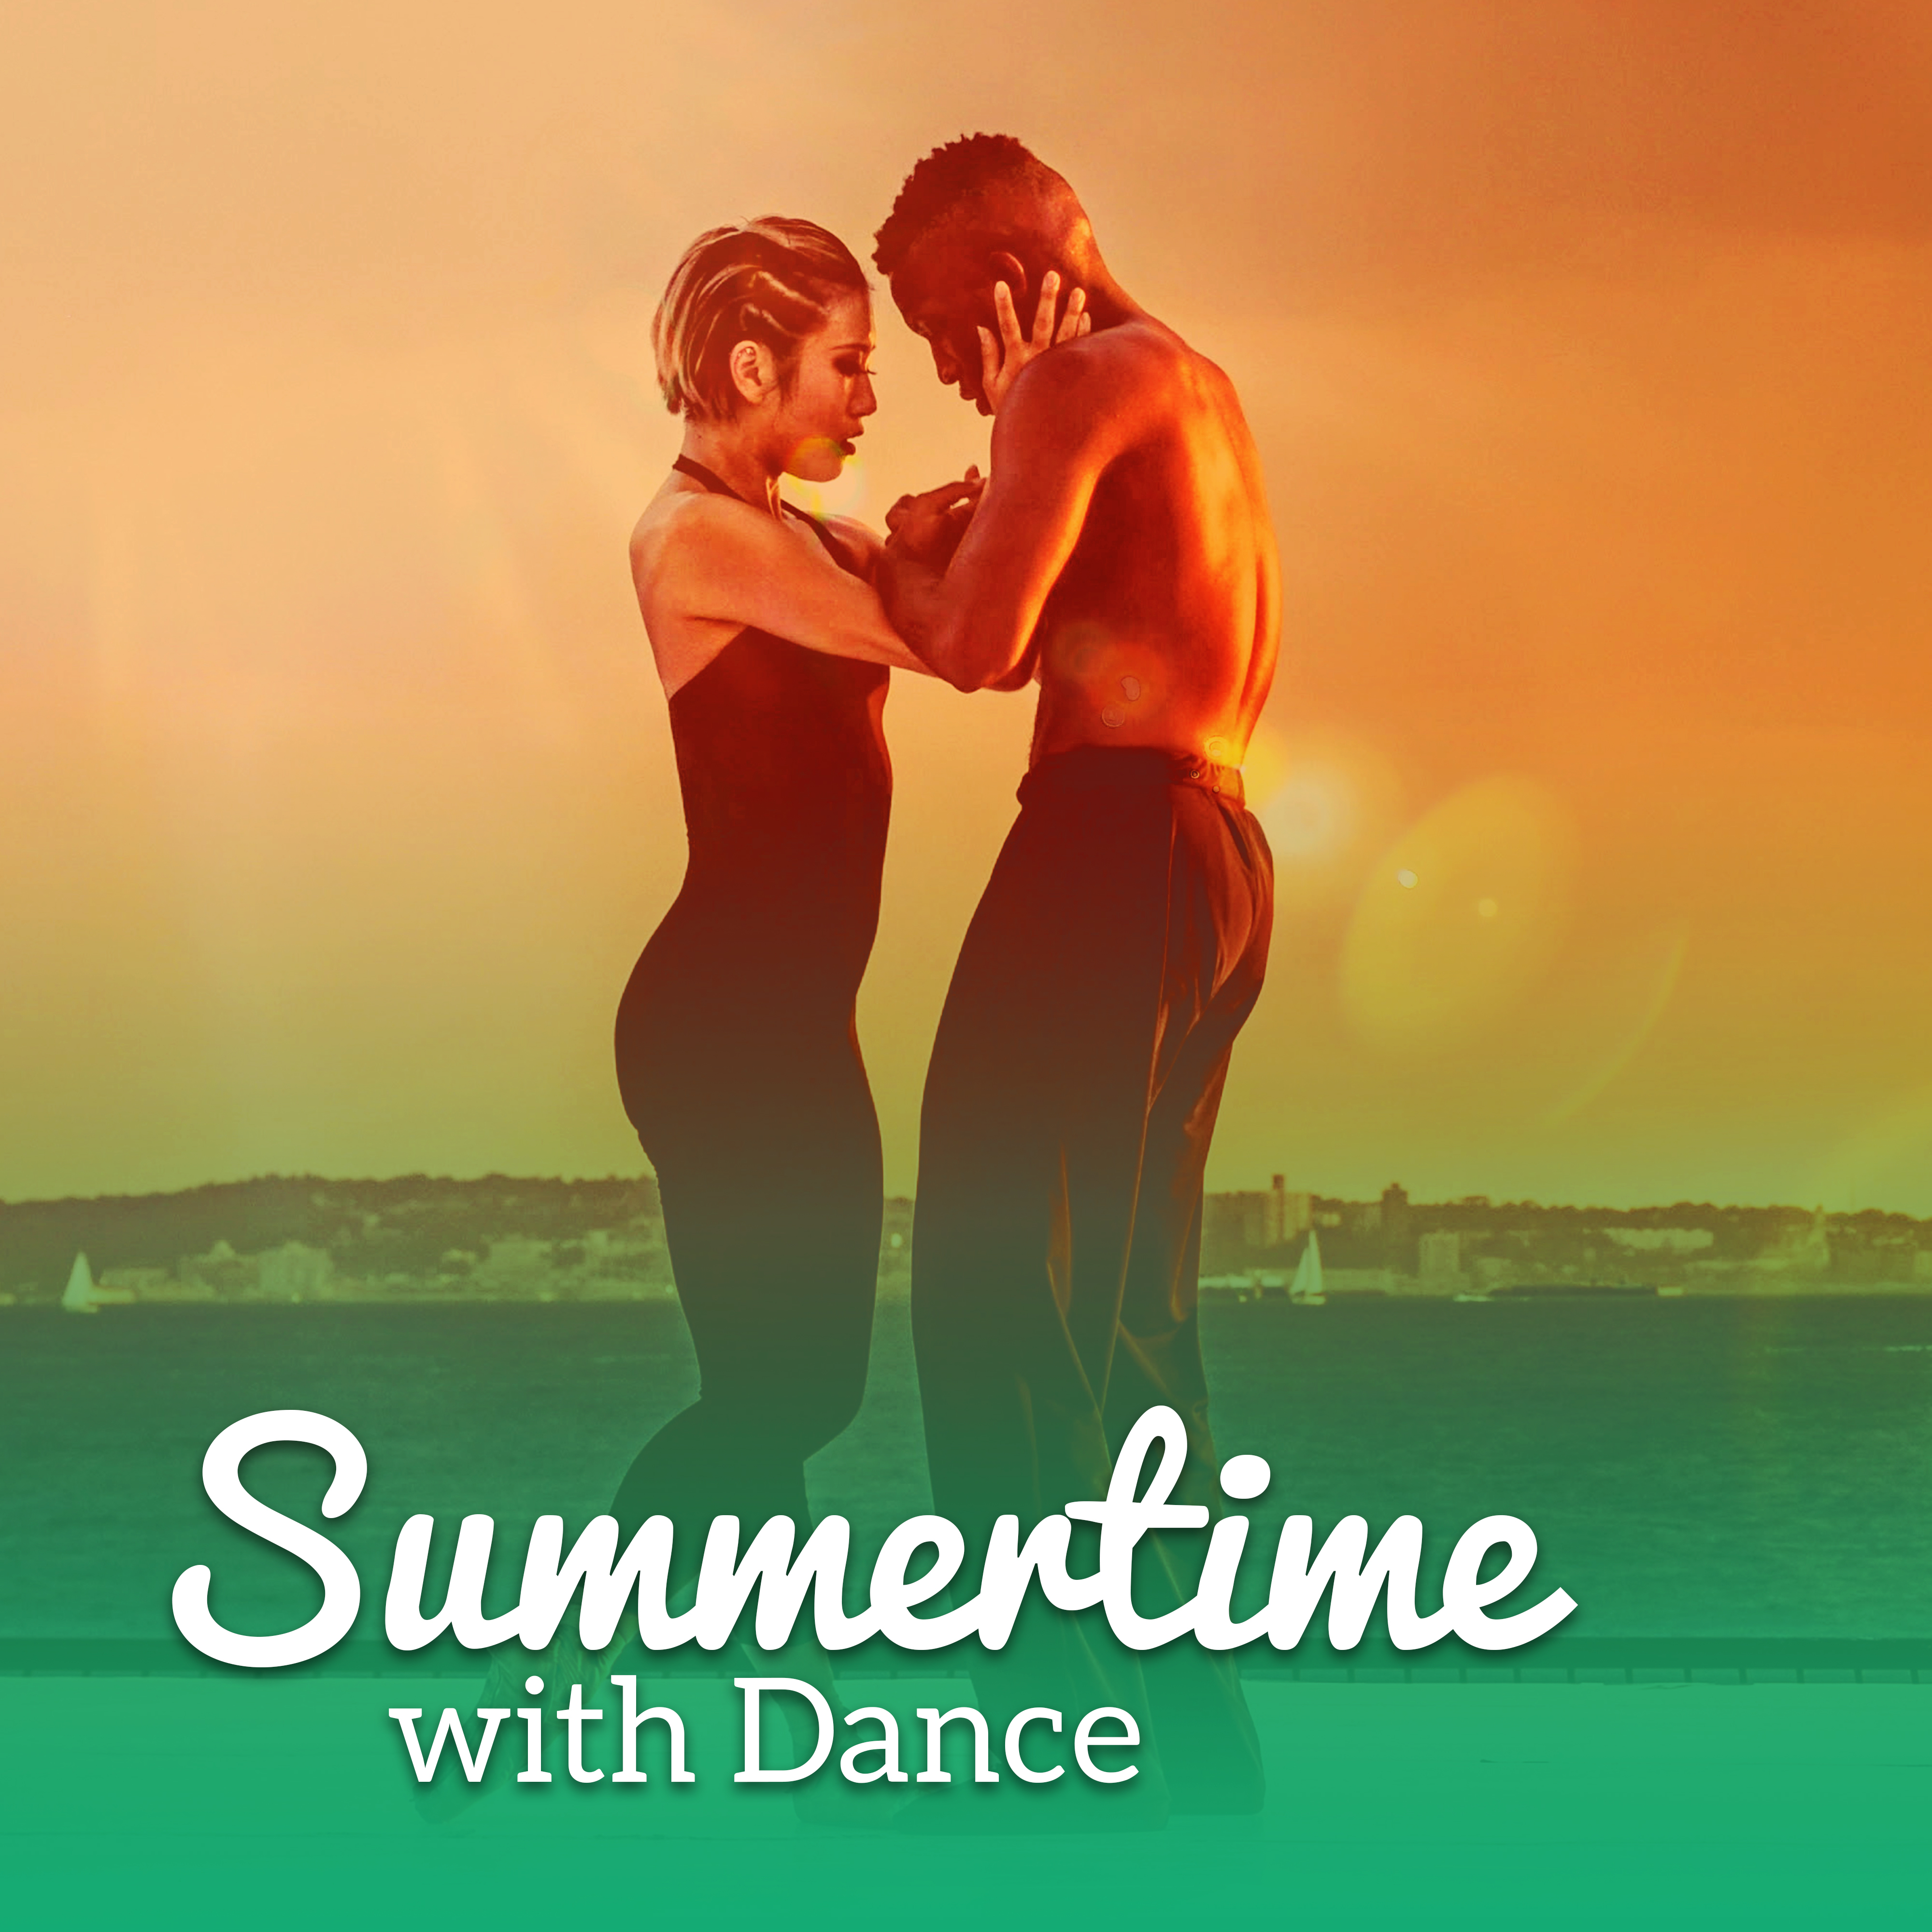 Summertime with Dance  Ibiza Dance Party, Holiday Vibes, Night Sounds, Ibiza Poolside, Bar Chill Out, Colorful Drinks, Dancefloor